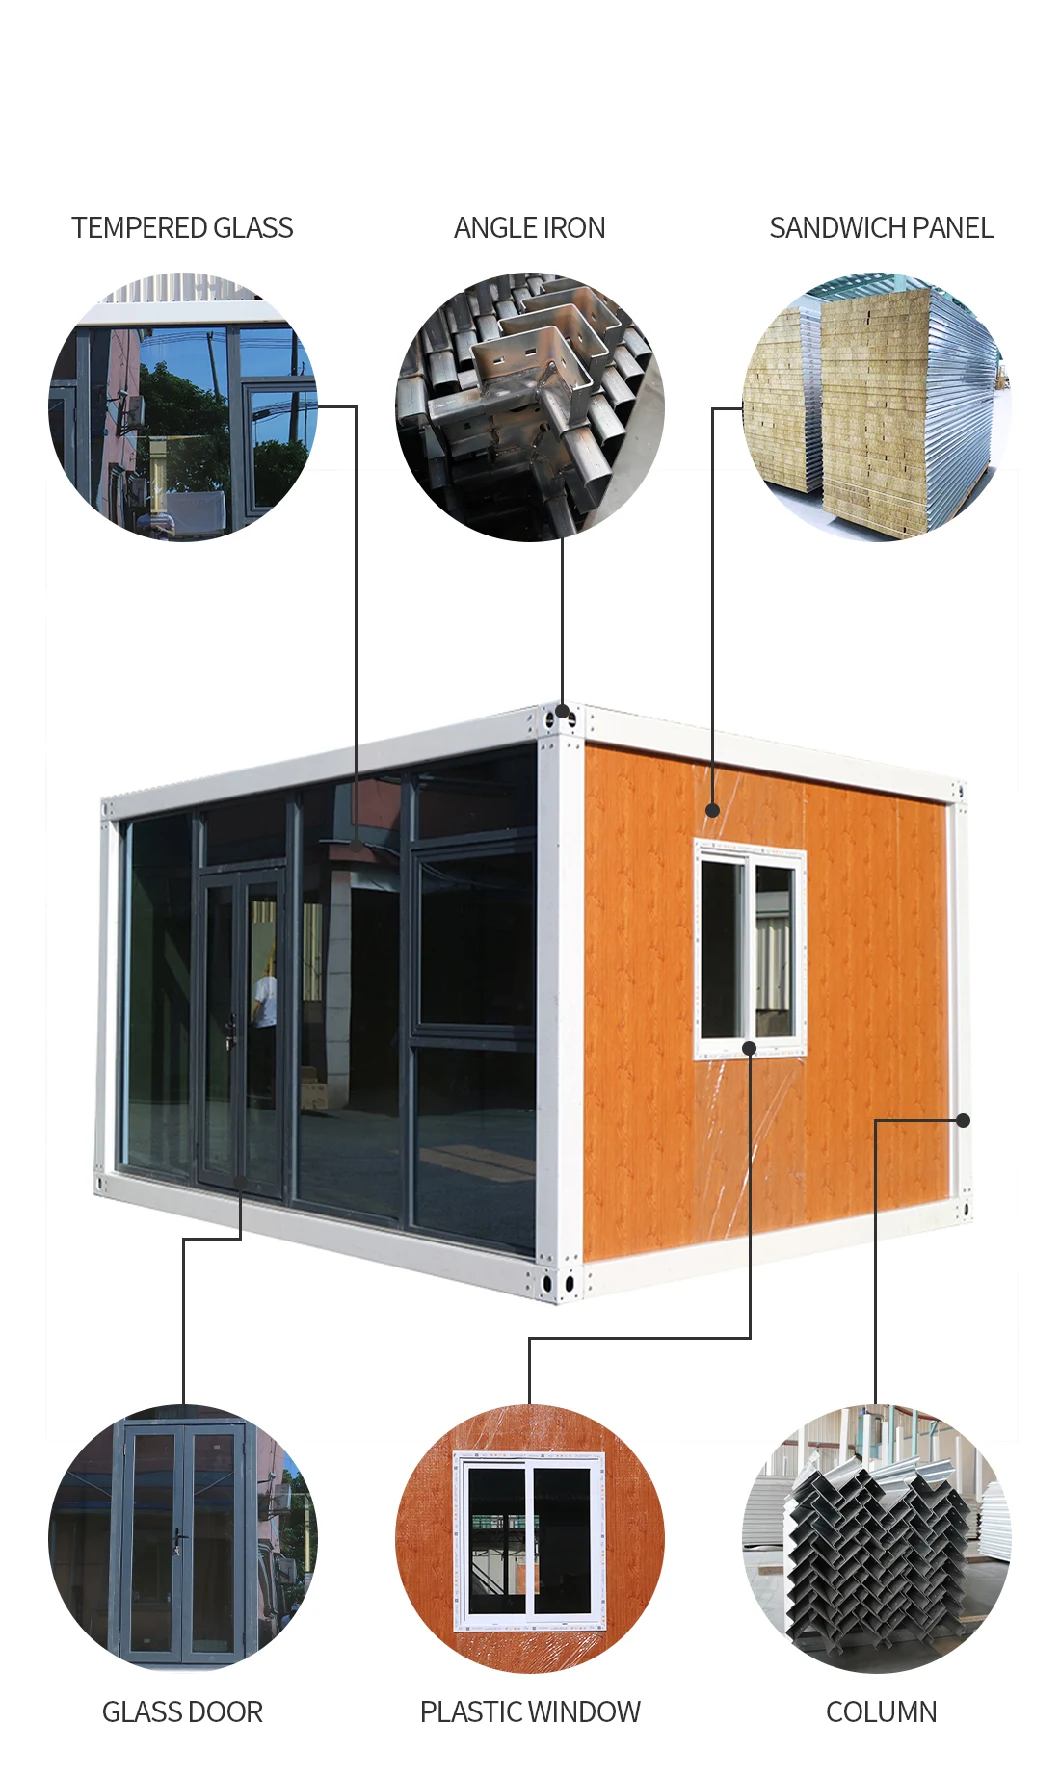 China Wholesale Multifunction Luxury American/Australia Standrand Modern Mobile Home Modular/Container/Steel Structure Building/Prefabricated House/Prefab House